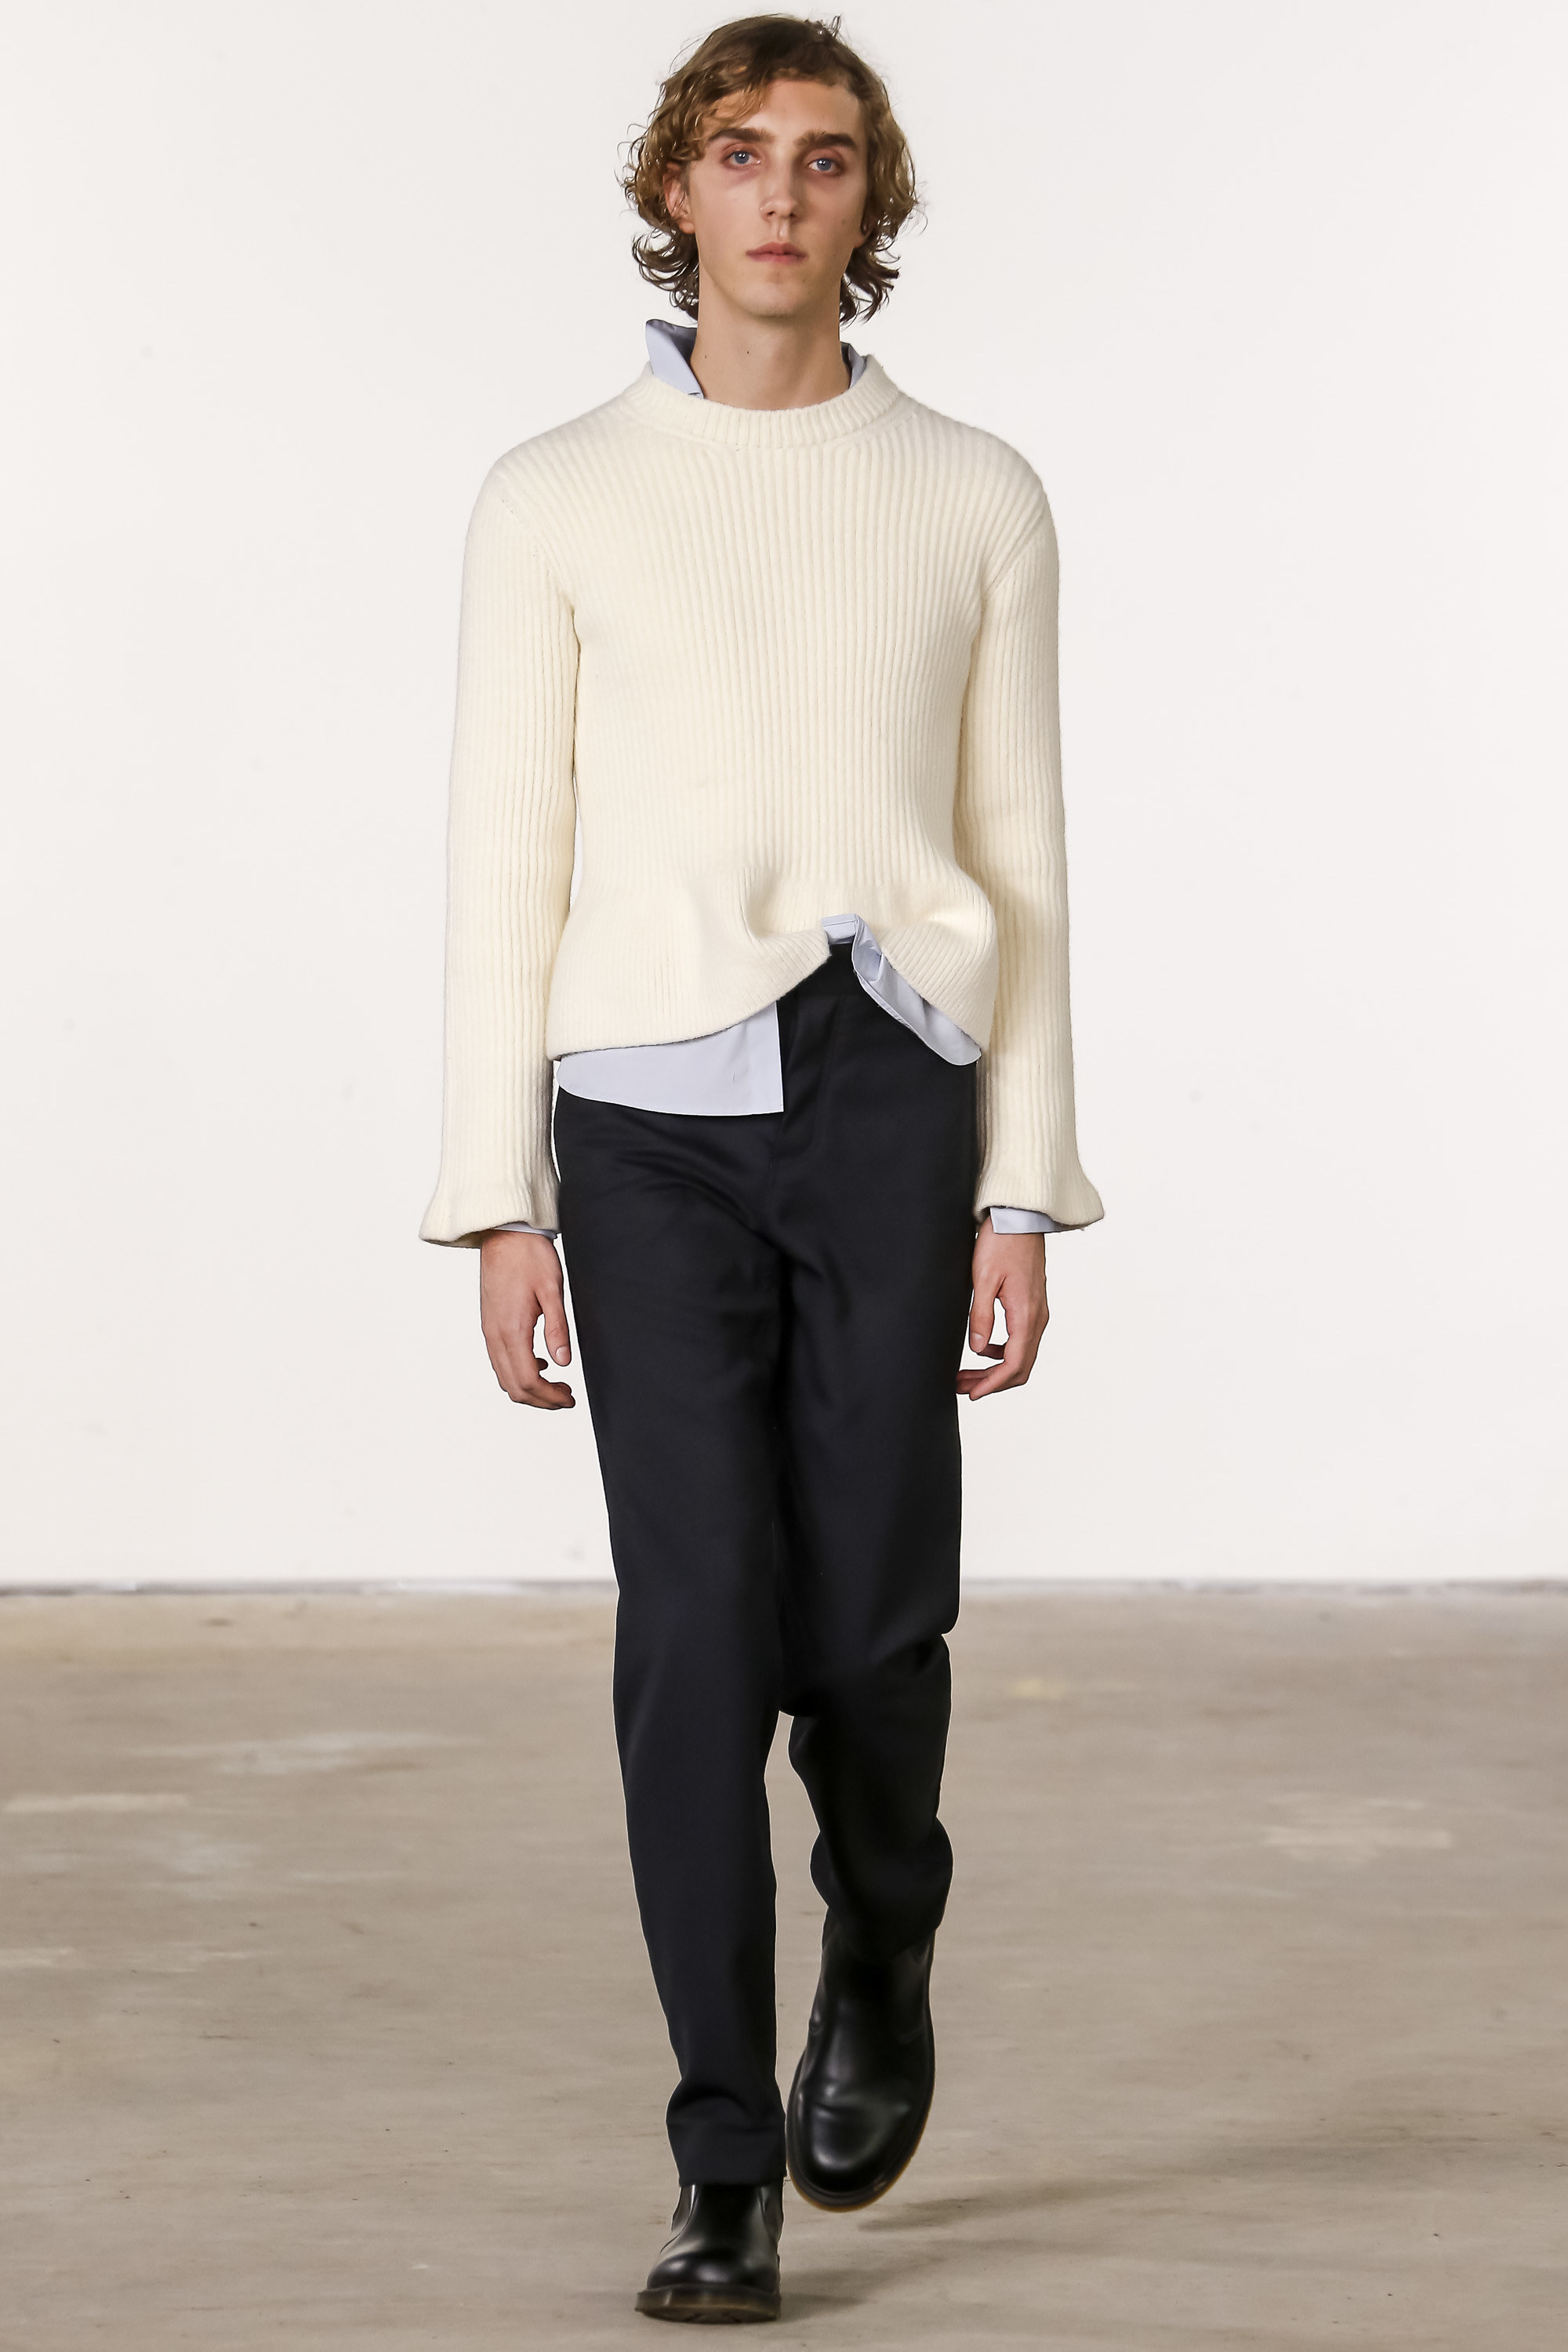 Orley Fall/Winter 2016 New York - Fashionably Male